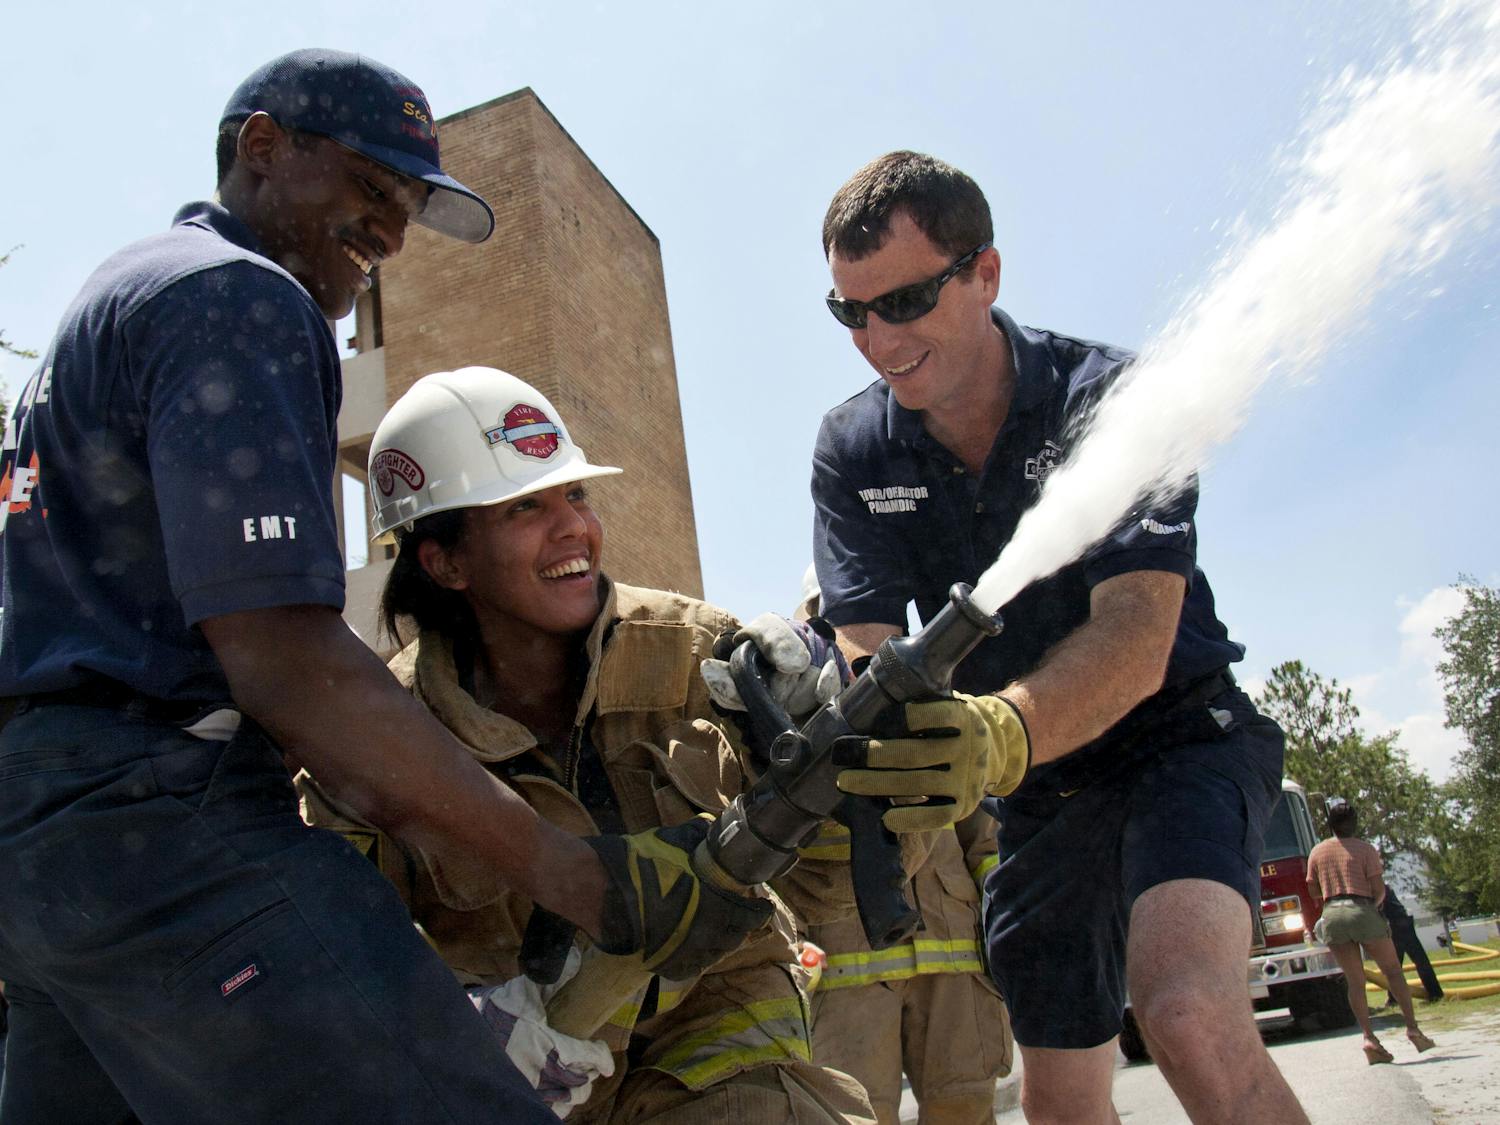 CITIZENS' FIRE ACADEMY -- Reggie Kinsey, 24, an EMT at Station 7, and Greg Fenn, 32, a driver/operator at Station 1, assist Mary Ann Dematas, 30, with a 1 1/4 inch (diameter) fire hose, spraying 170 gallons of water per minute, Saturday at Station 3, near Waldo Road and 8th Avenue. Dematas, who works in the Lawn and Gardening Department at Home Depot, tried to compare the water pressure to a difficult task, but carrying 30-pound bags of soil doesn't illustrate the constant force her body stood against.